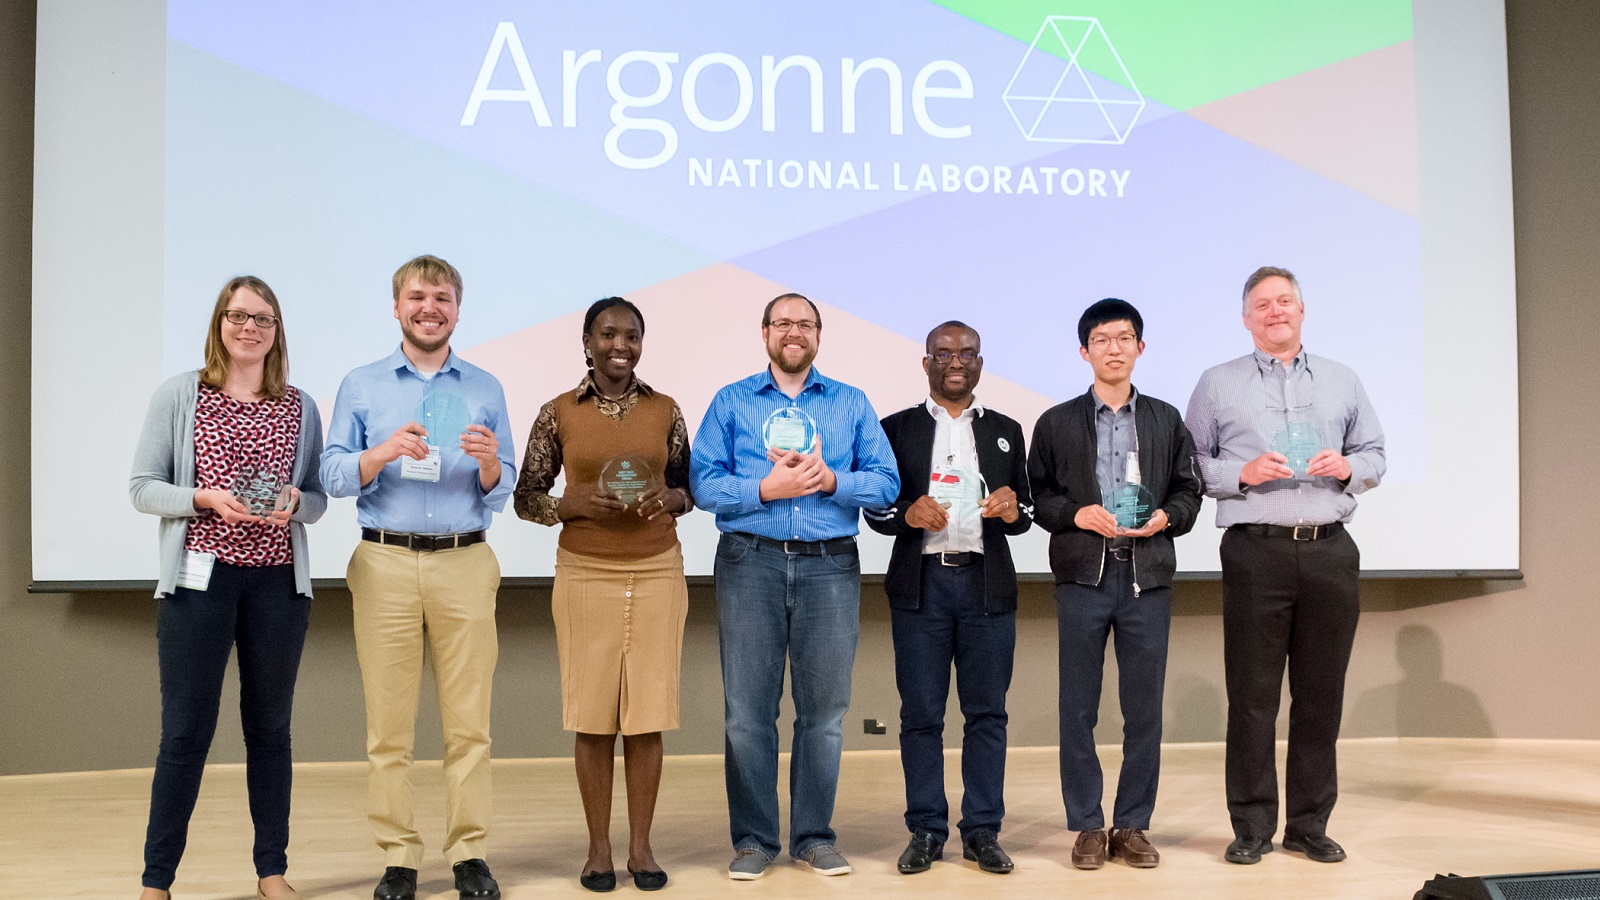 These seven students received awards for the best presentations at the end of Argonne’s two-week Modeling, Experimentation and Validation summer school. (Image by Argonne National Laboratory.)